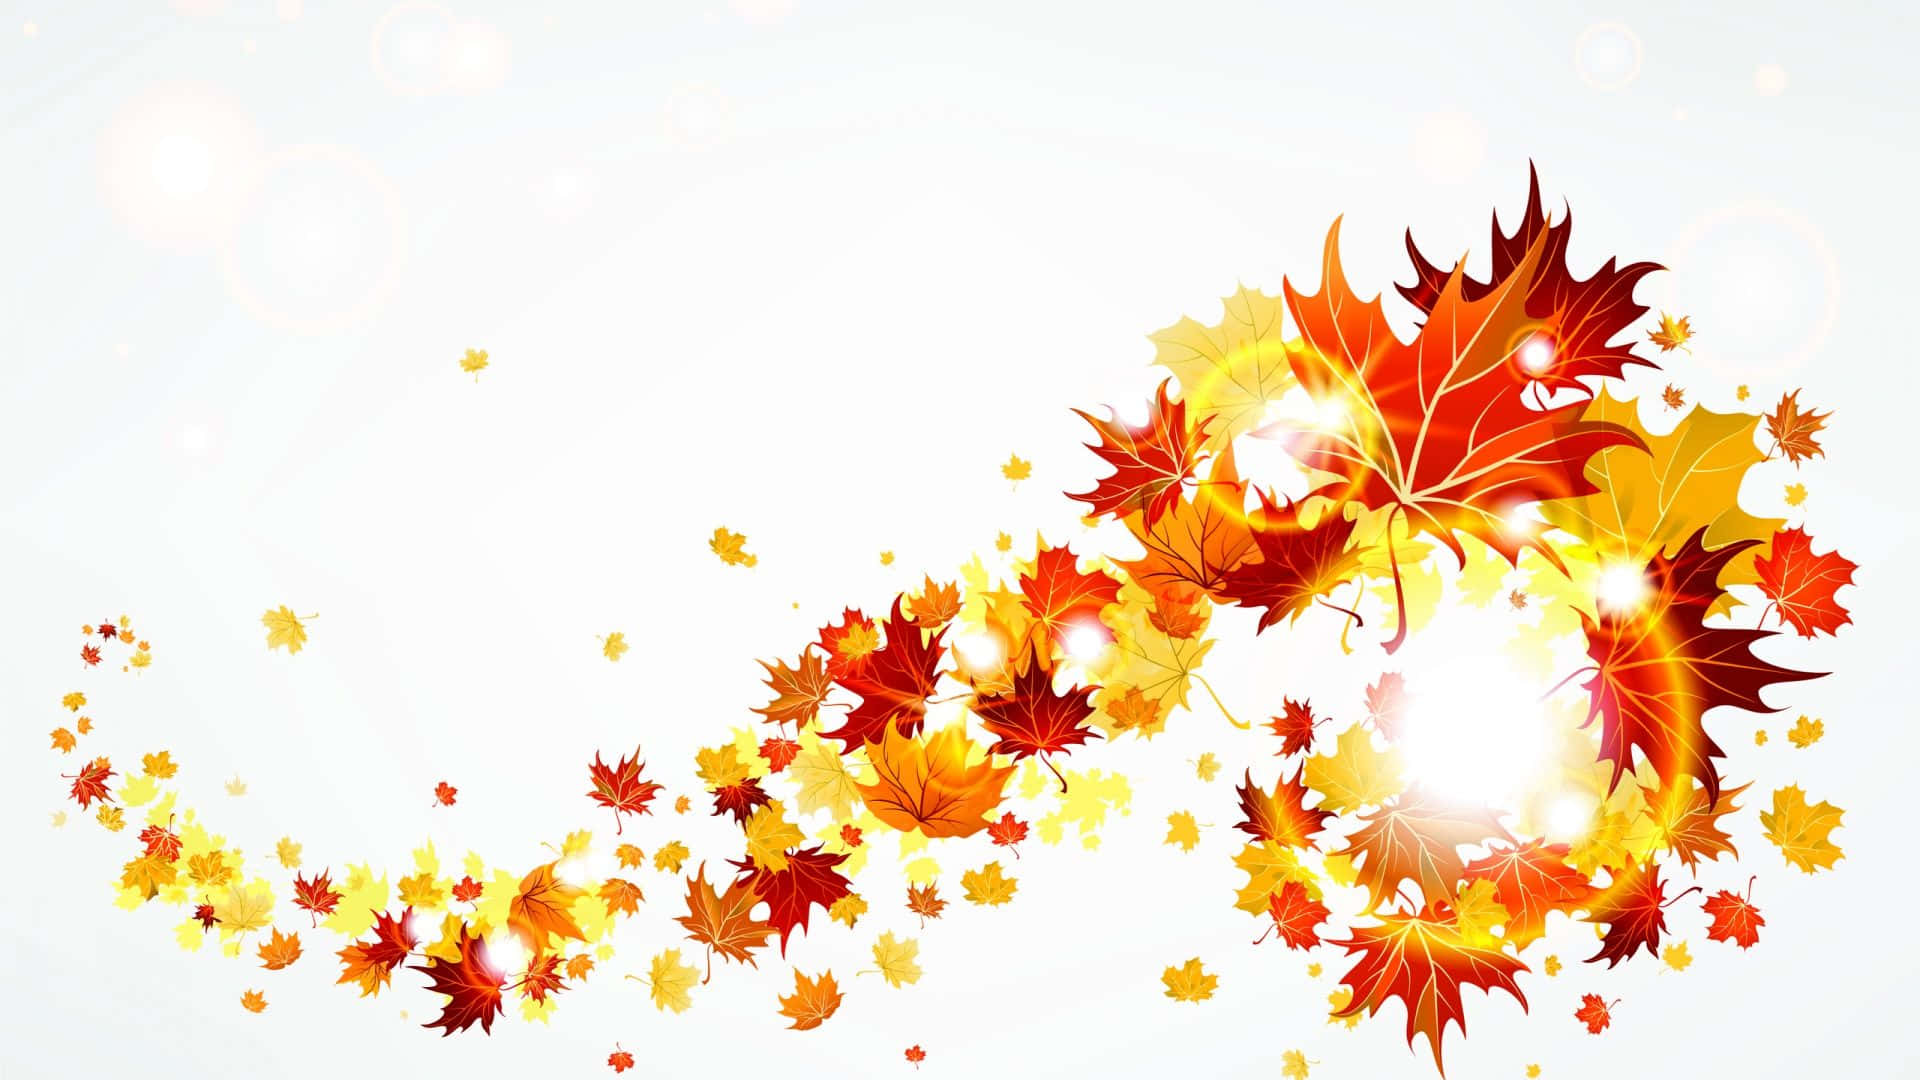 Autumn Leaves Background With A Light Shining On It